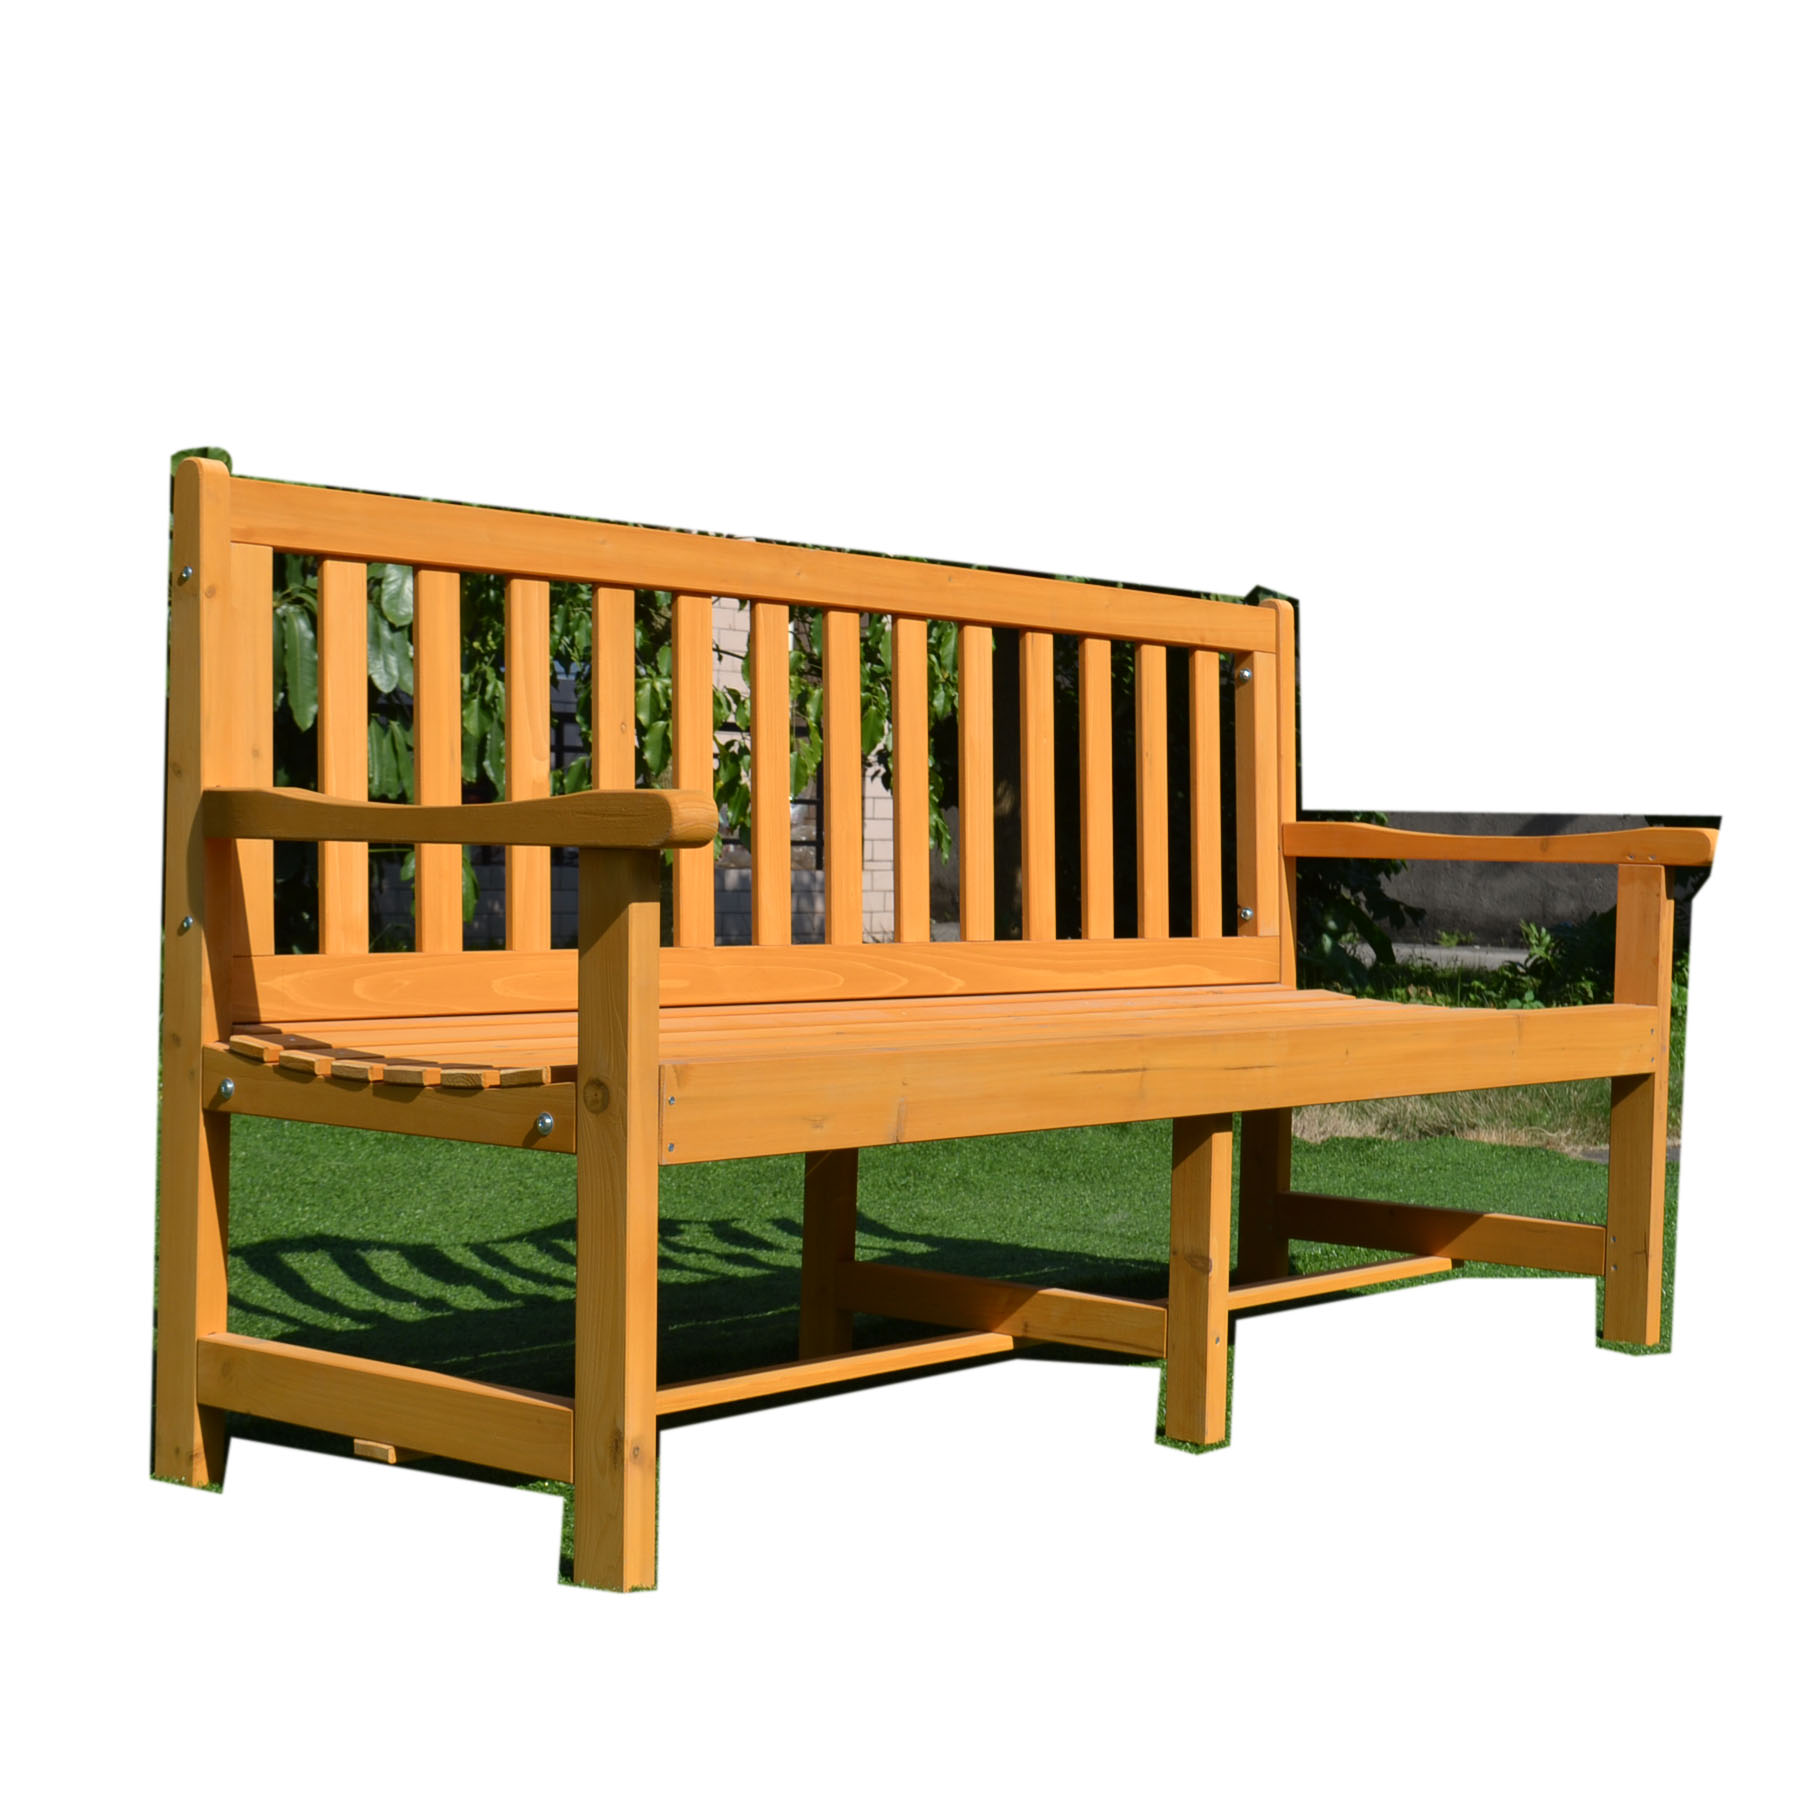 Patio garden outdoor furniture picnic table and bench wooden chairs